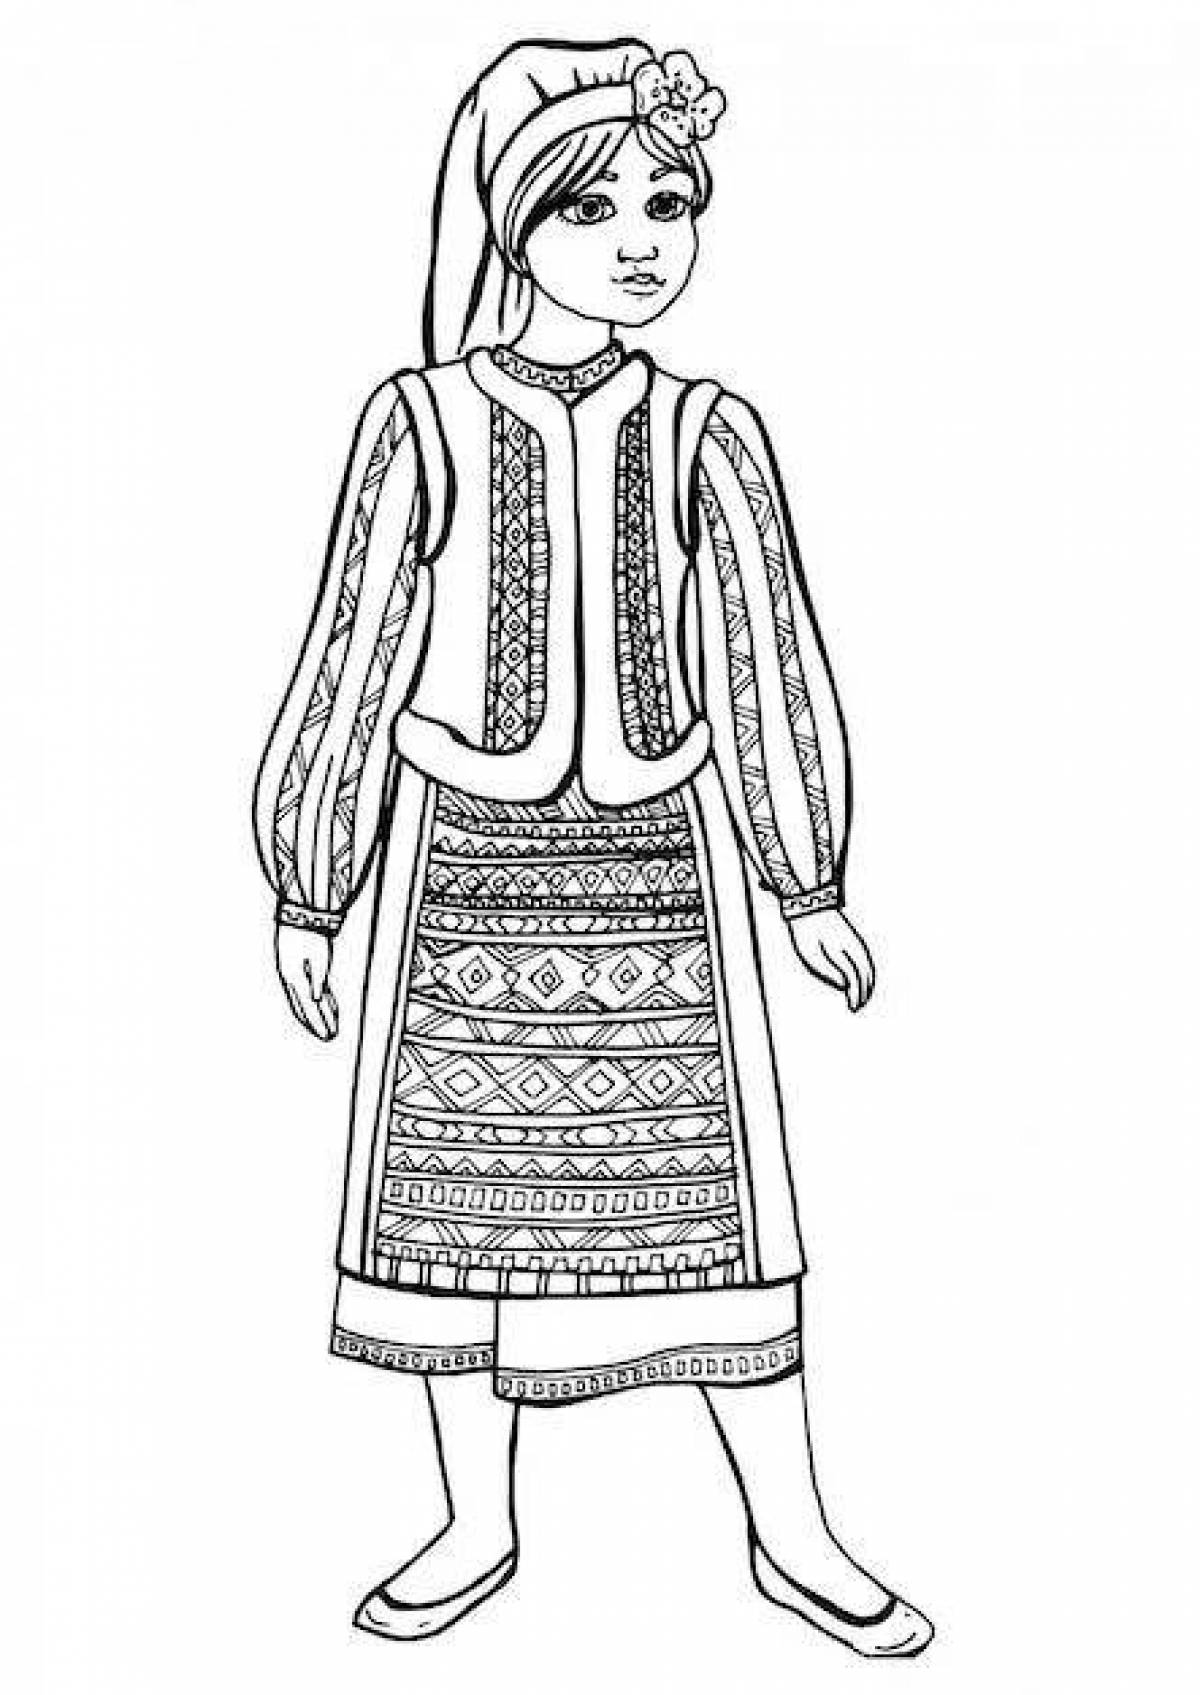 Coloring page for colorful costumes